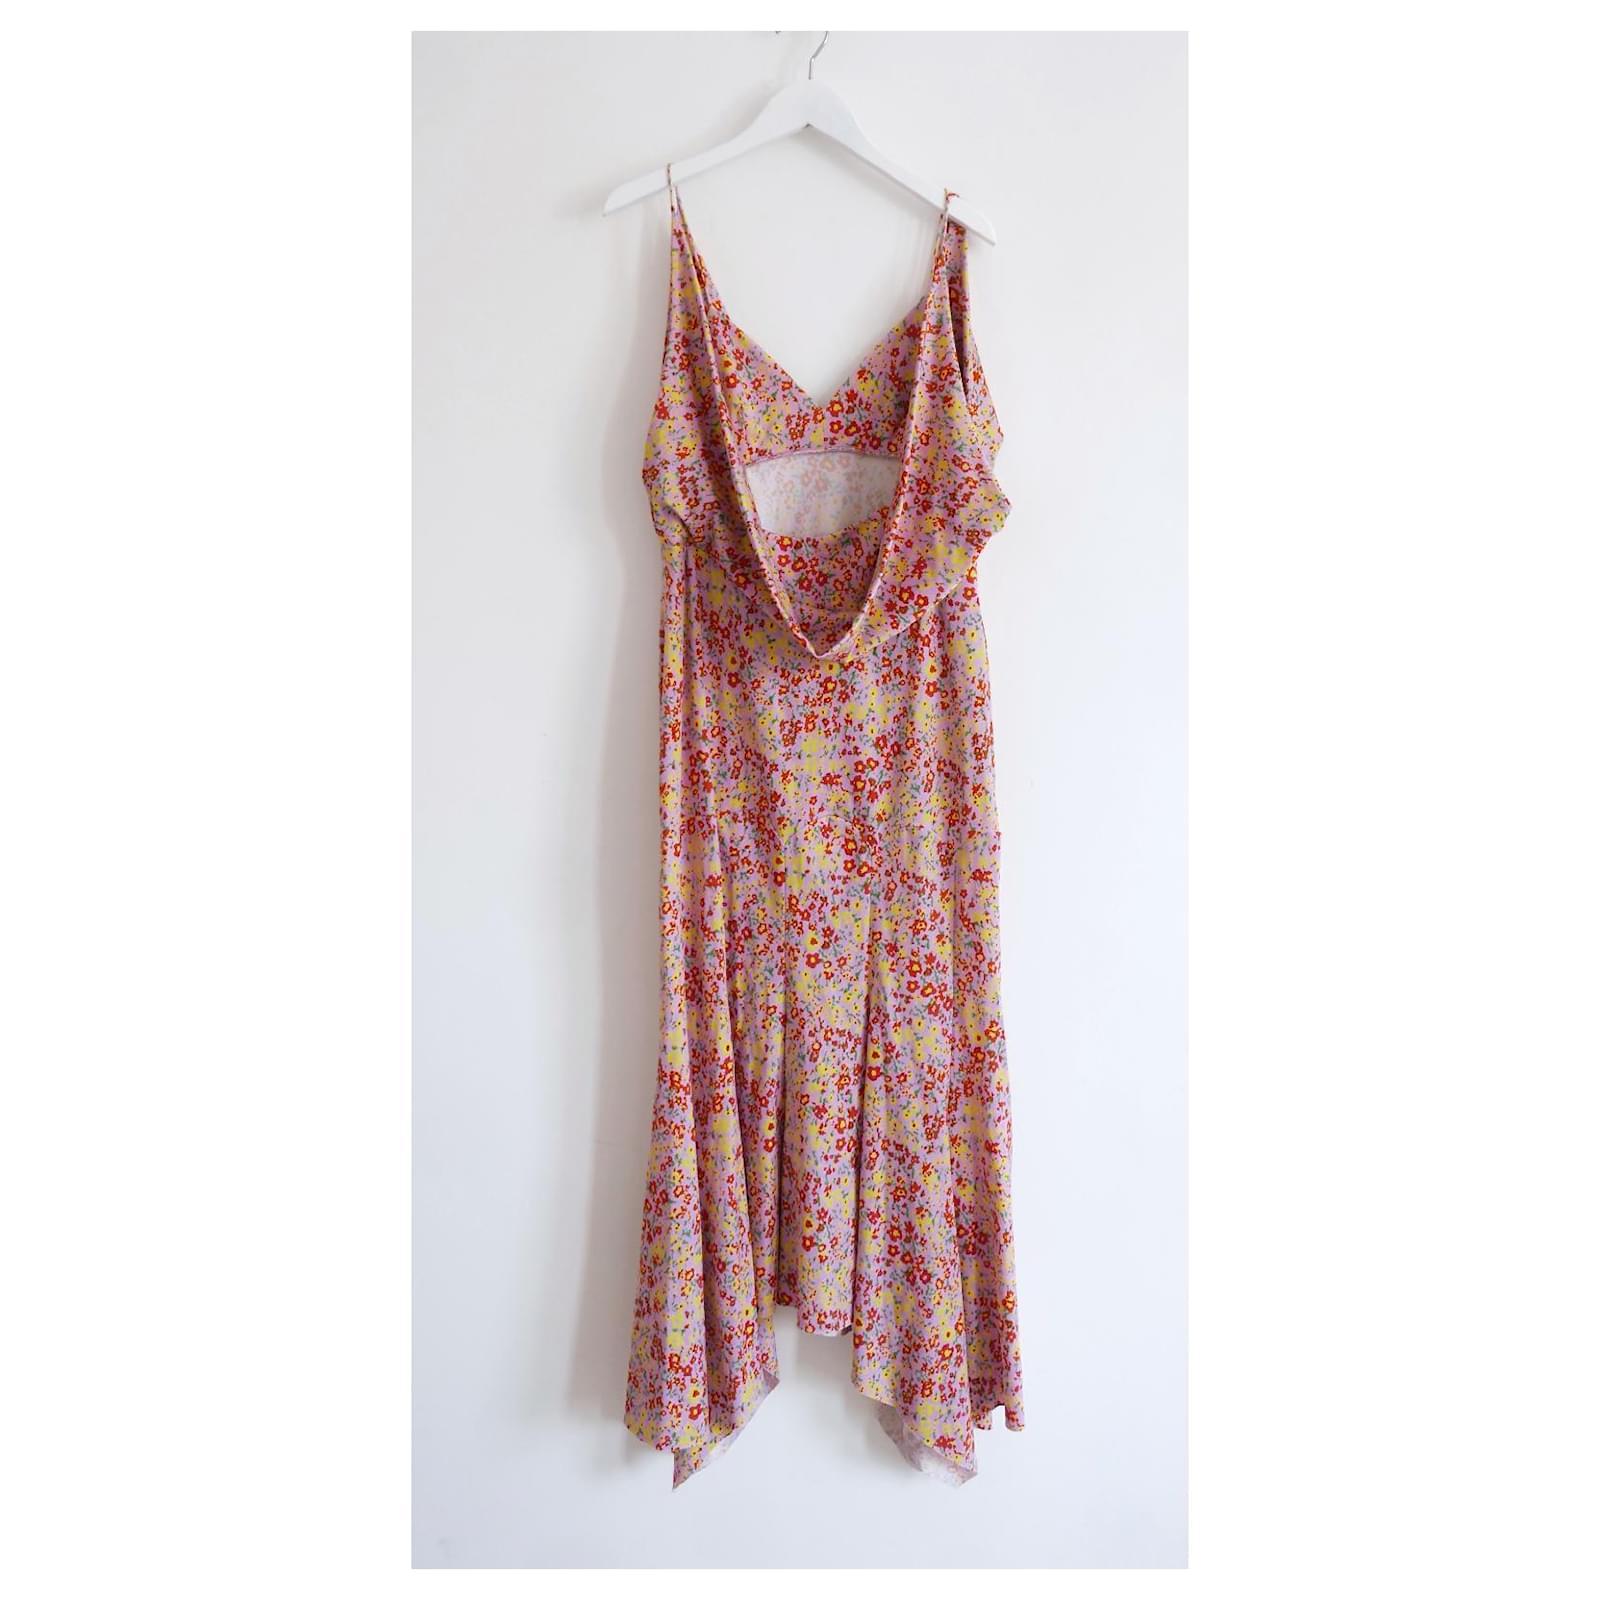 Gorgeous Philosophy di Lorenzo Serafini dress - bought for £750 and unworn. 
Made from smooth polyamide mix jersey with a pretty pink backed red and yellow 
ditsy floral print. Beautifully cut with curved panelling through the hips, handkerchief